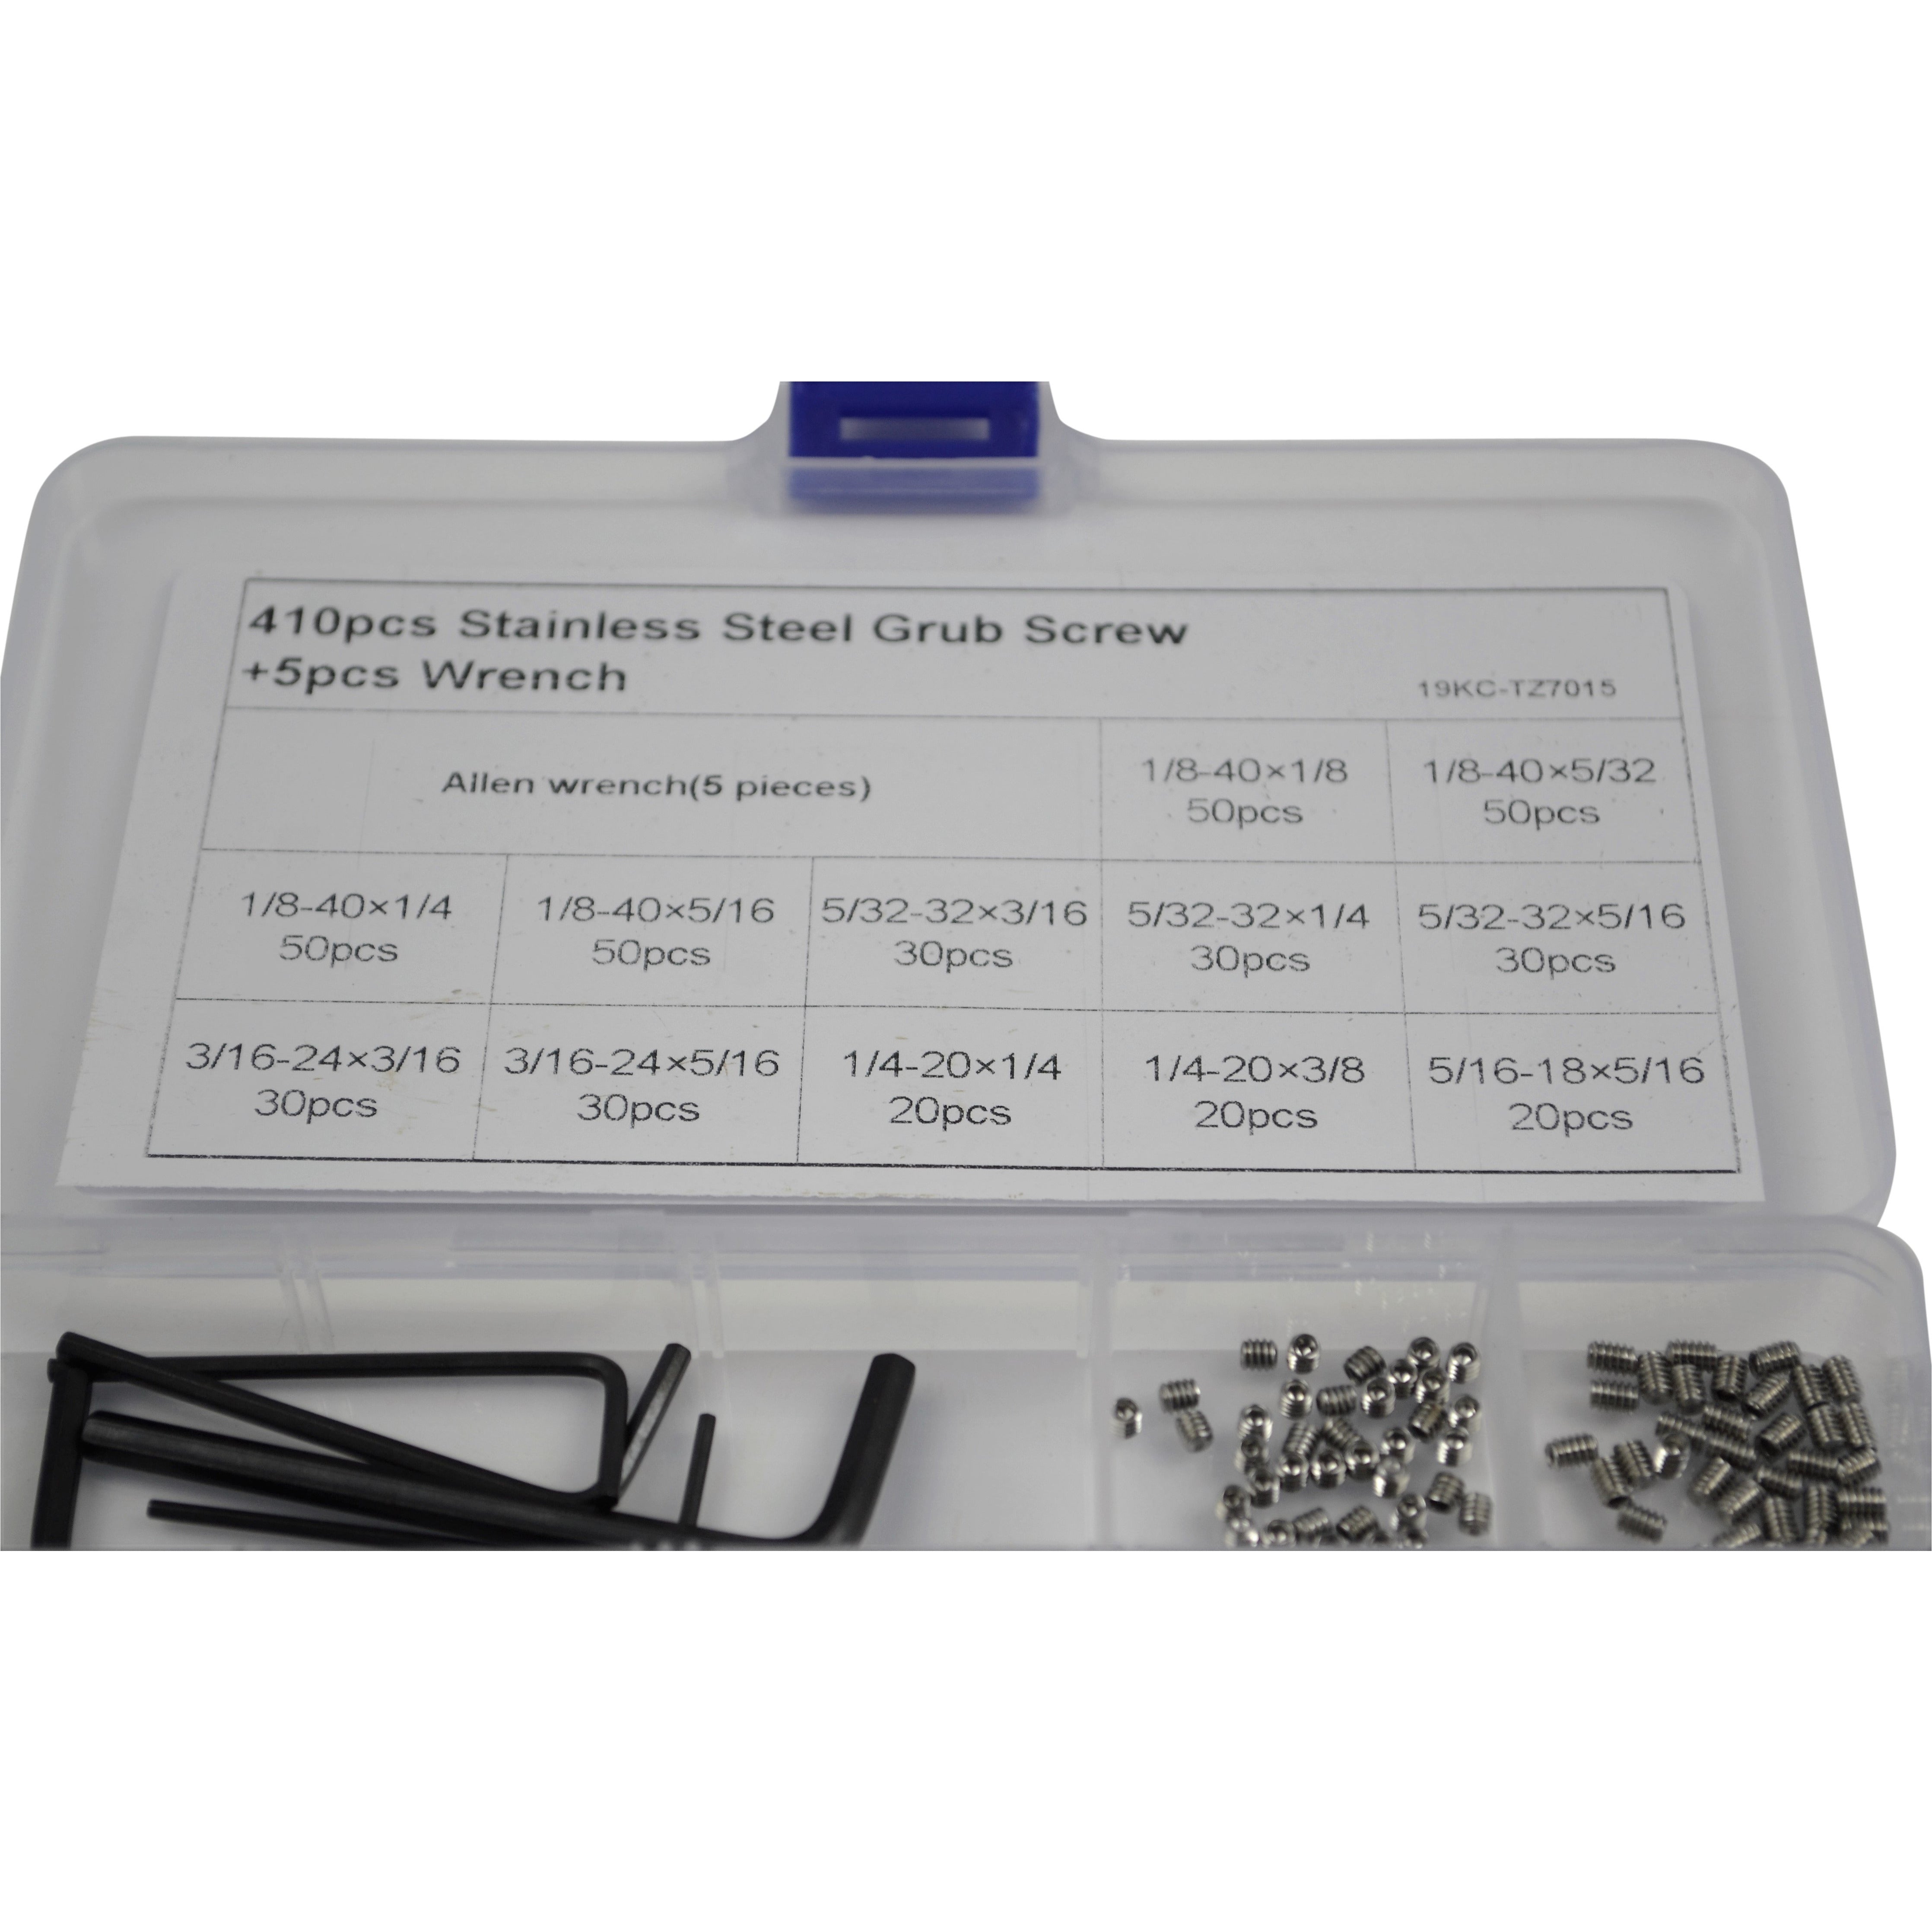 stainless steel imperial grub screws grab kit assortment 410piece 1/8 to 5/16 industrial fastners hardware screws bolts 